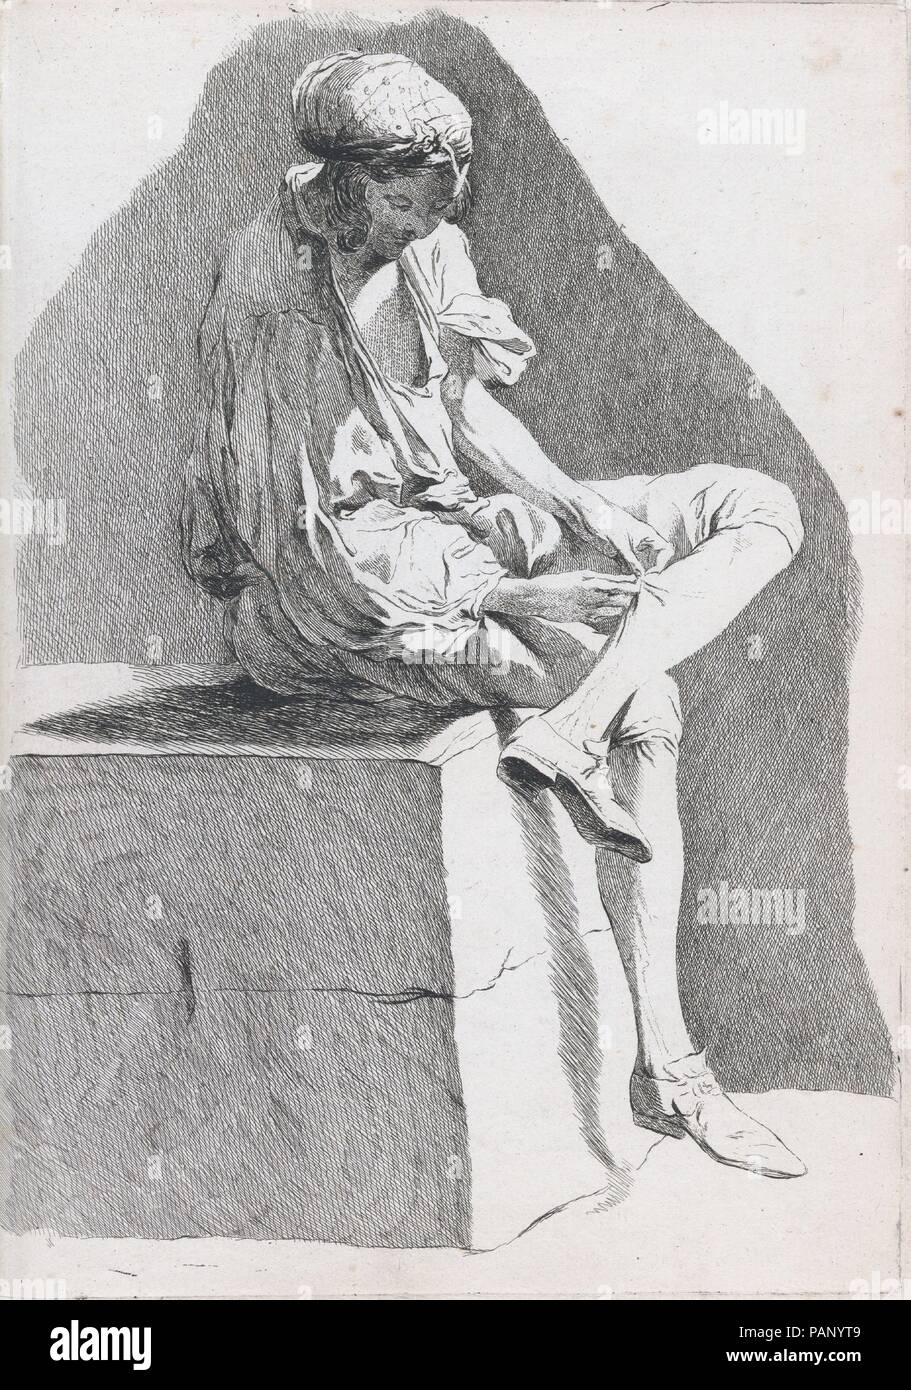 Youth Examining his Stocking (Young Boy of the People), pl. XVI from  "Recueil de caricatures". Artist: Ange-Laurent de La Live de Jully  (1725-1779); After Jacques François Joseph Saly (French, Valenciennes  1717-1776 Paris).